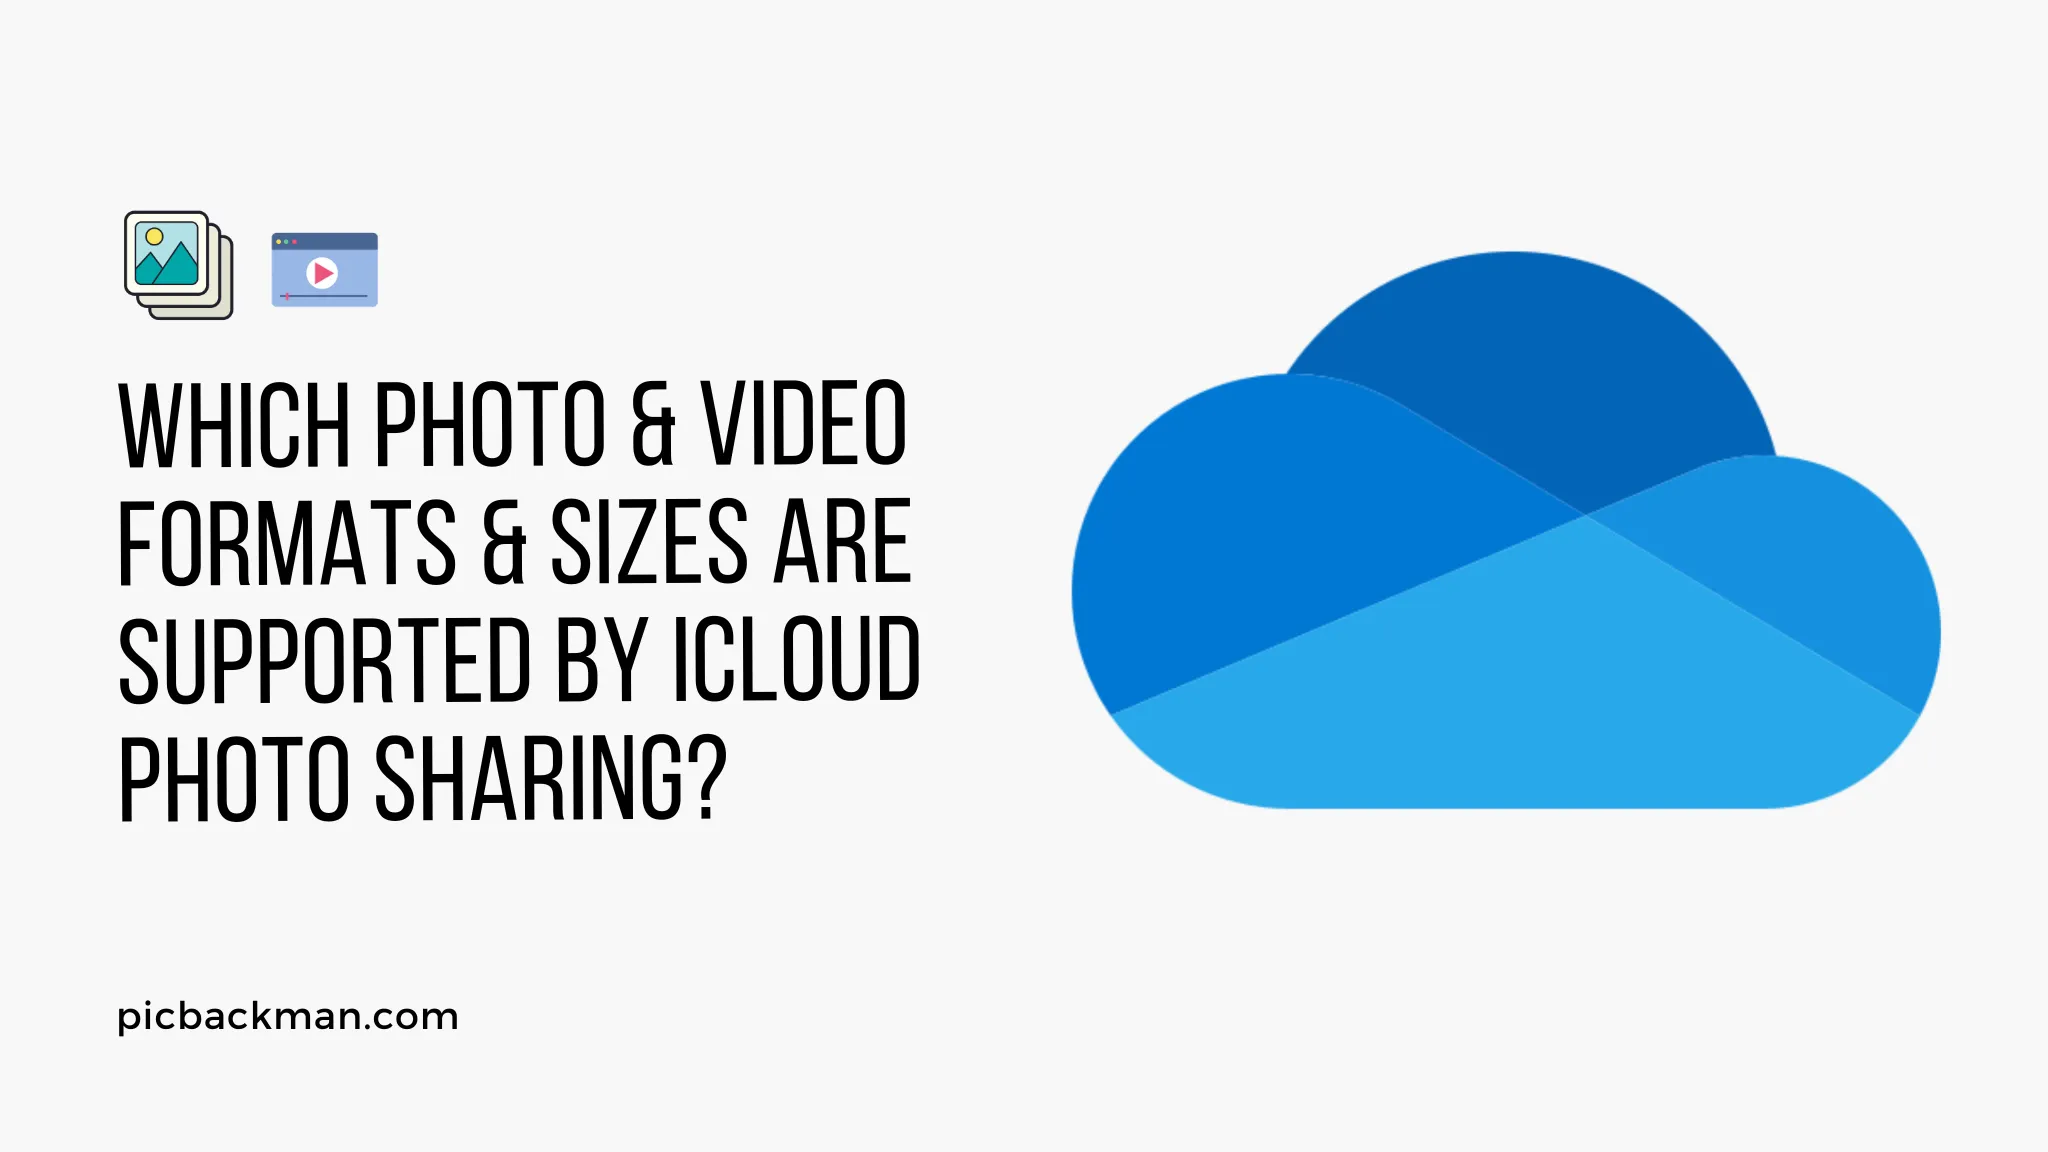 Which photo & video formats & sizes are supported by iCloud Photo Sharing?